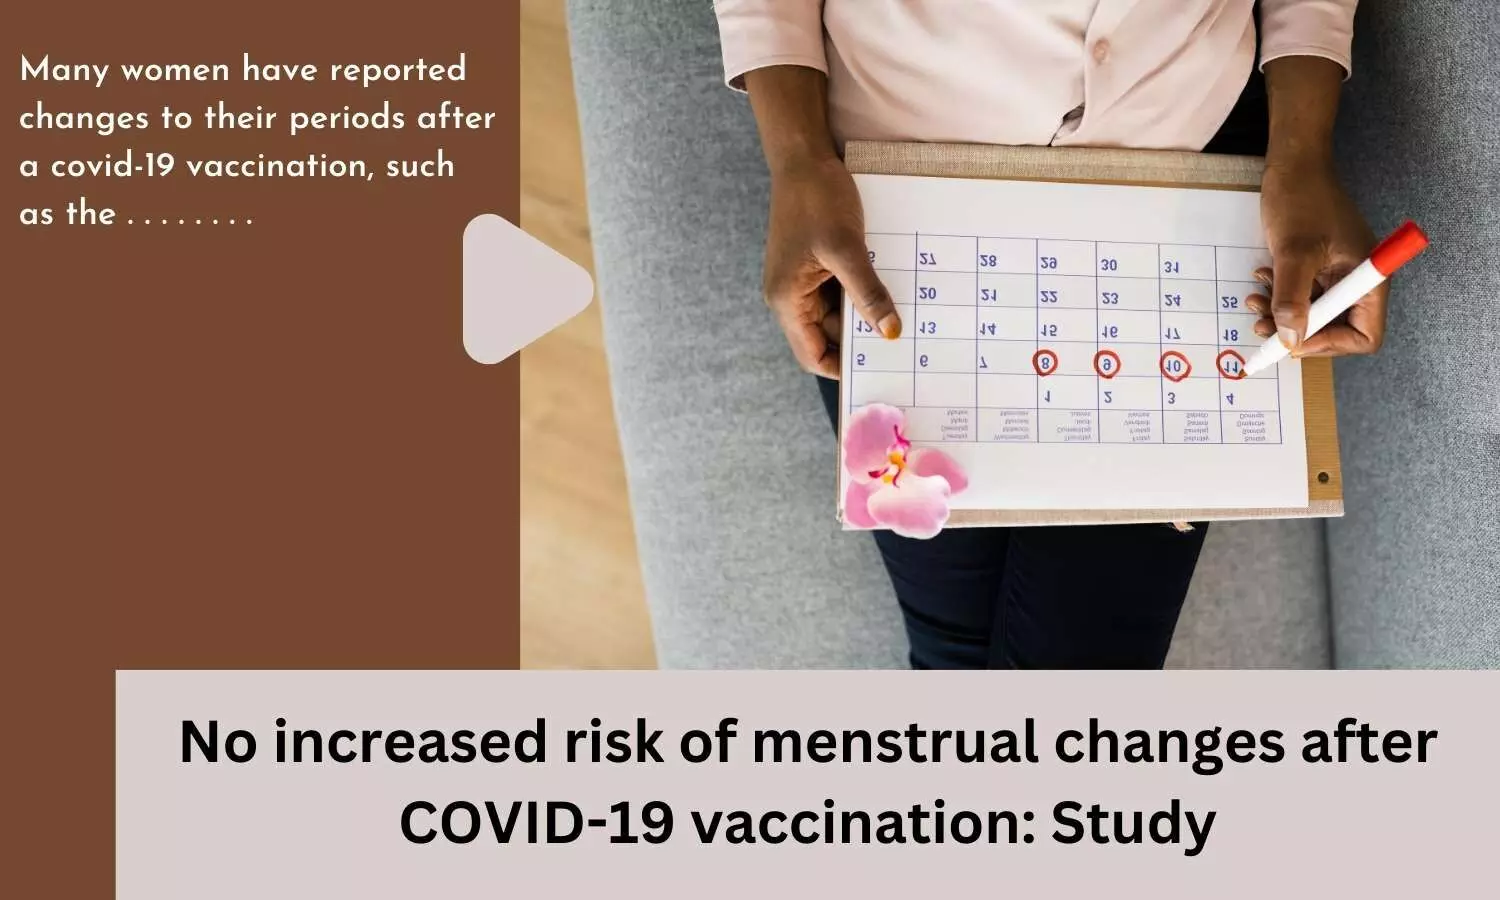 No increased risk of menstrual changes after COVID-19 vaccination: Study